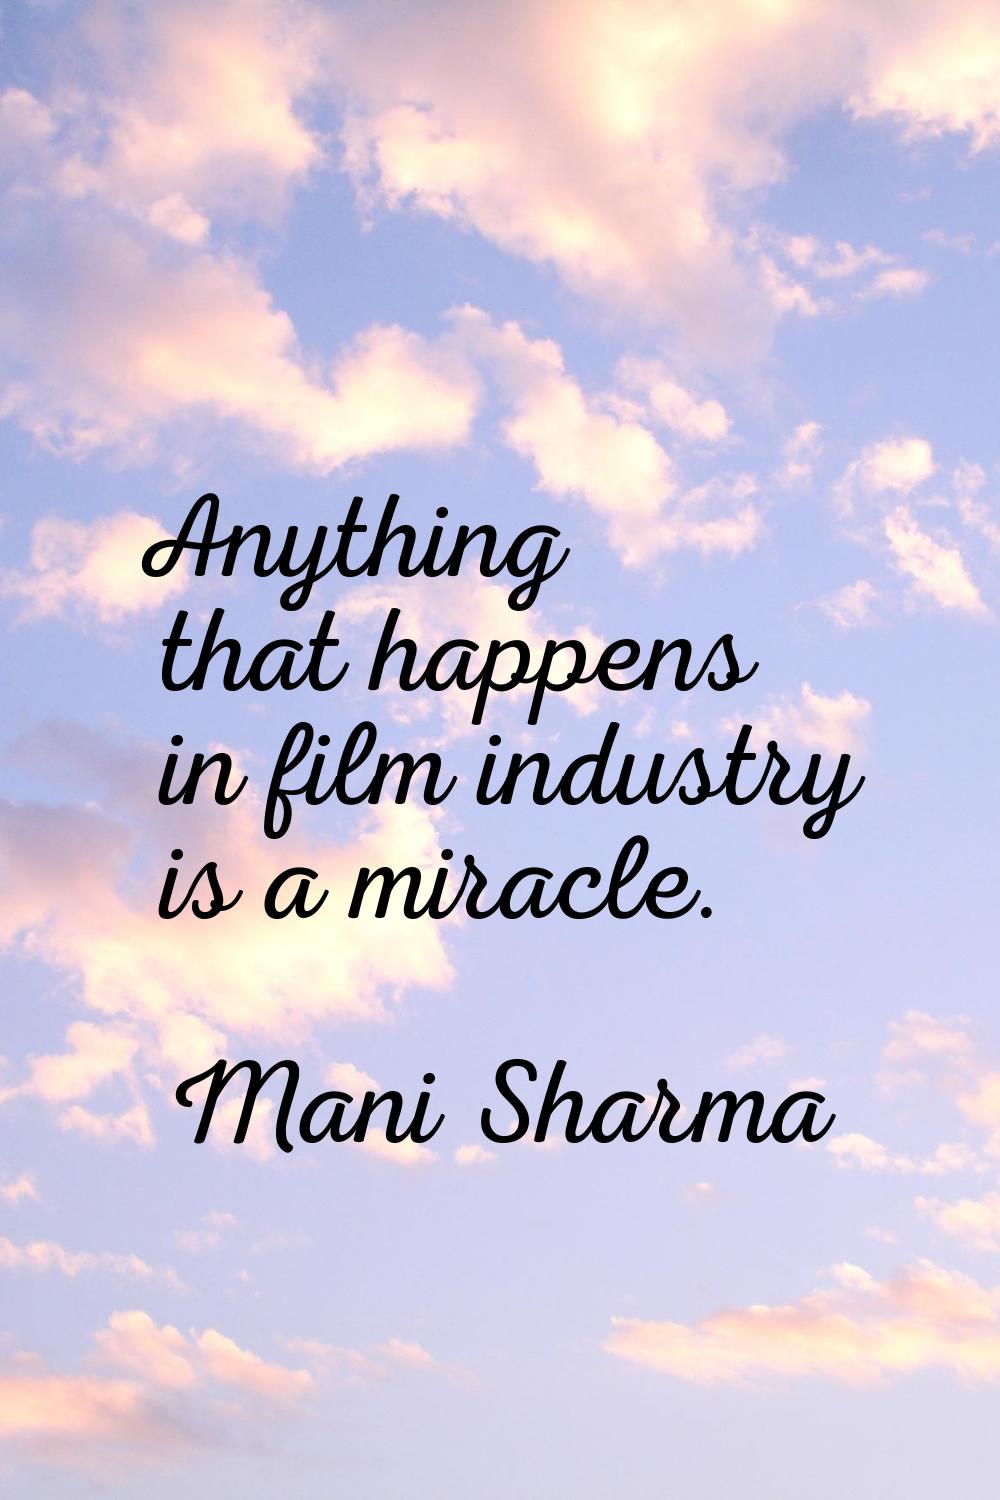 Anything that happens in film industry is a miracle.